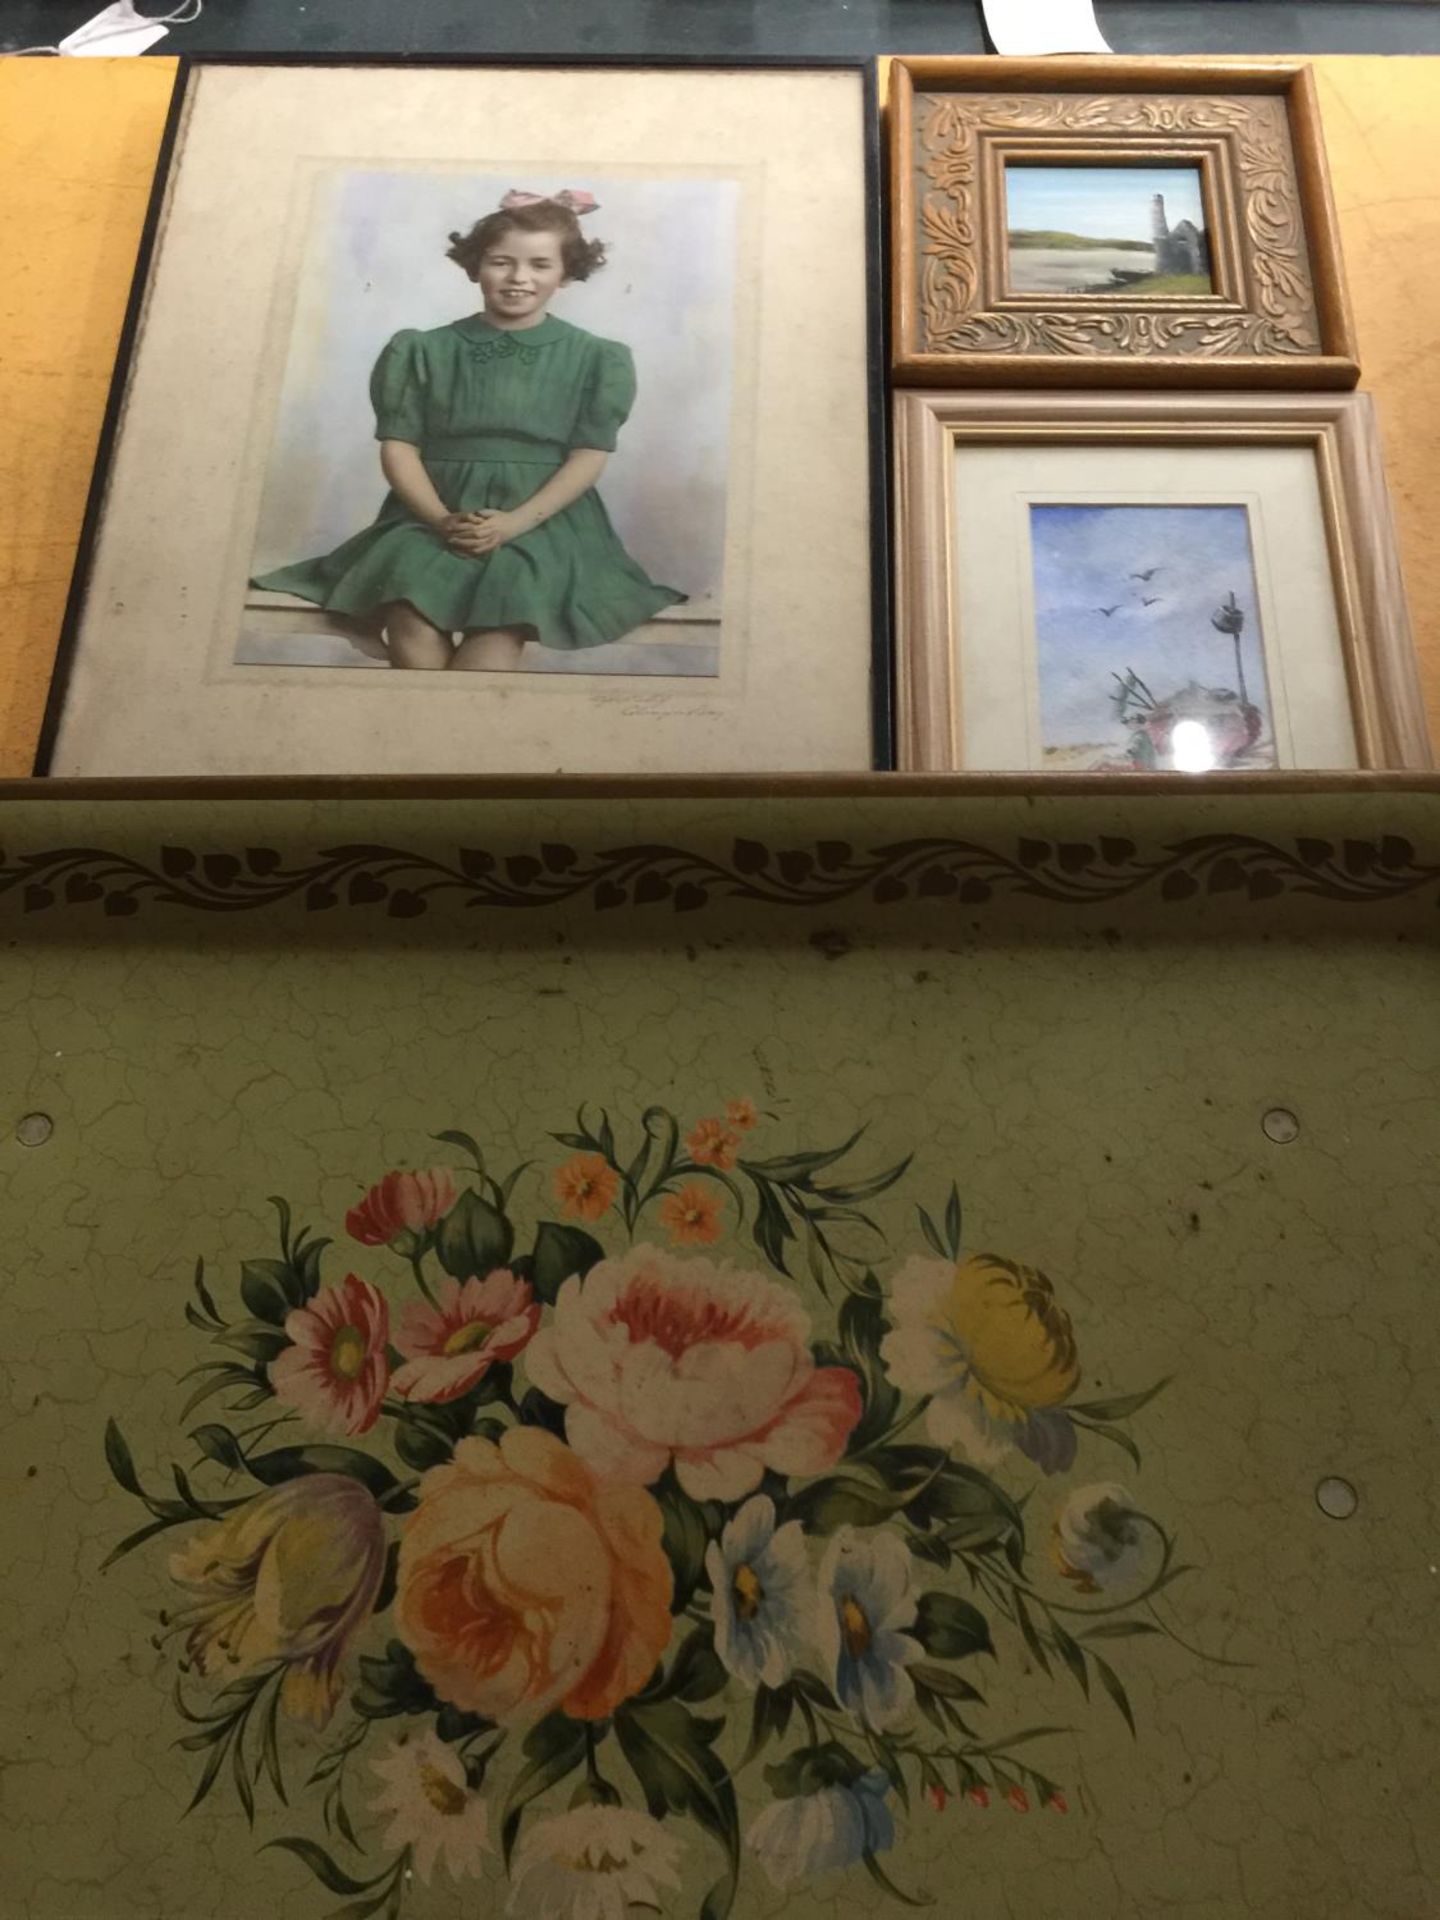 A VINTAGE TRAY WITH FOLD AWAY LEGS, THREE FRAMED PRINTS AND A FRAMED PHOGRAPH OF A GIRL - Image 2 of 3